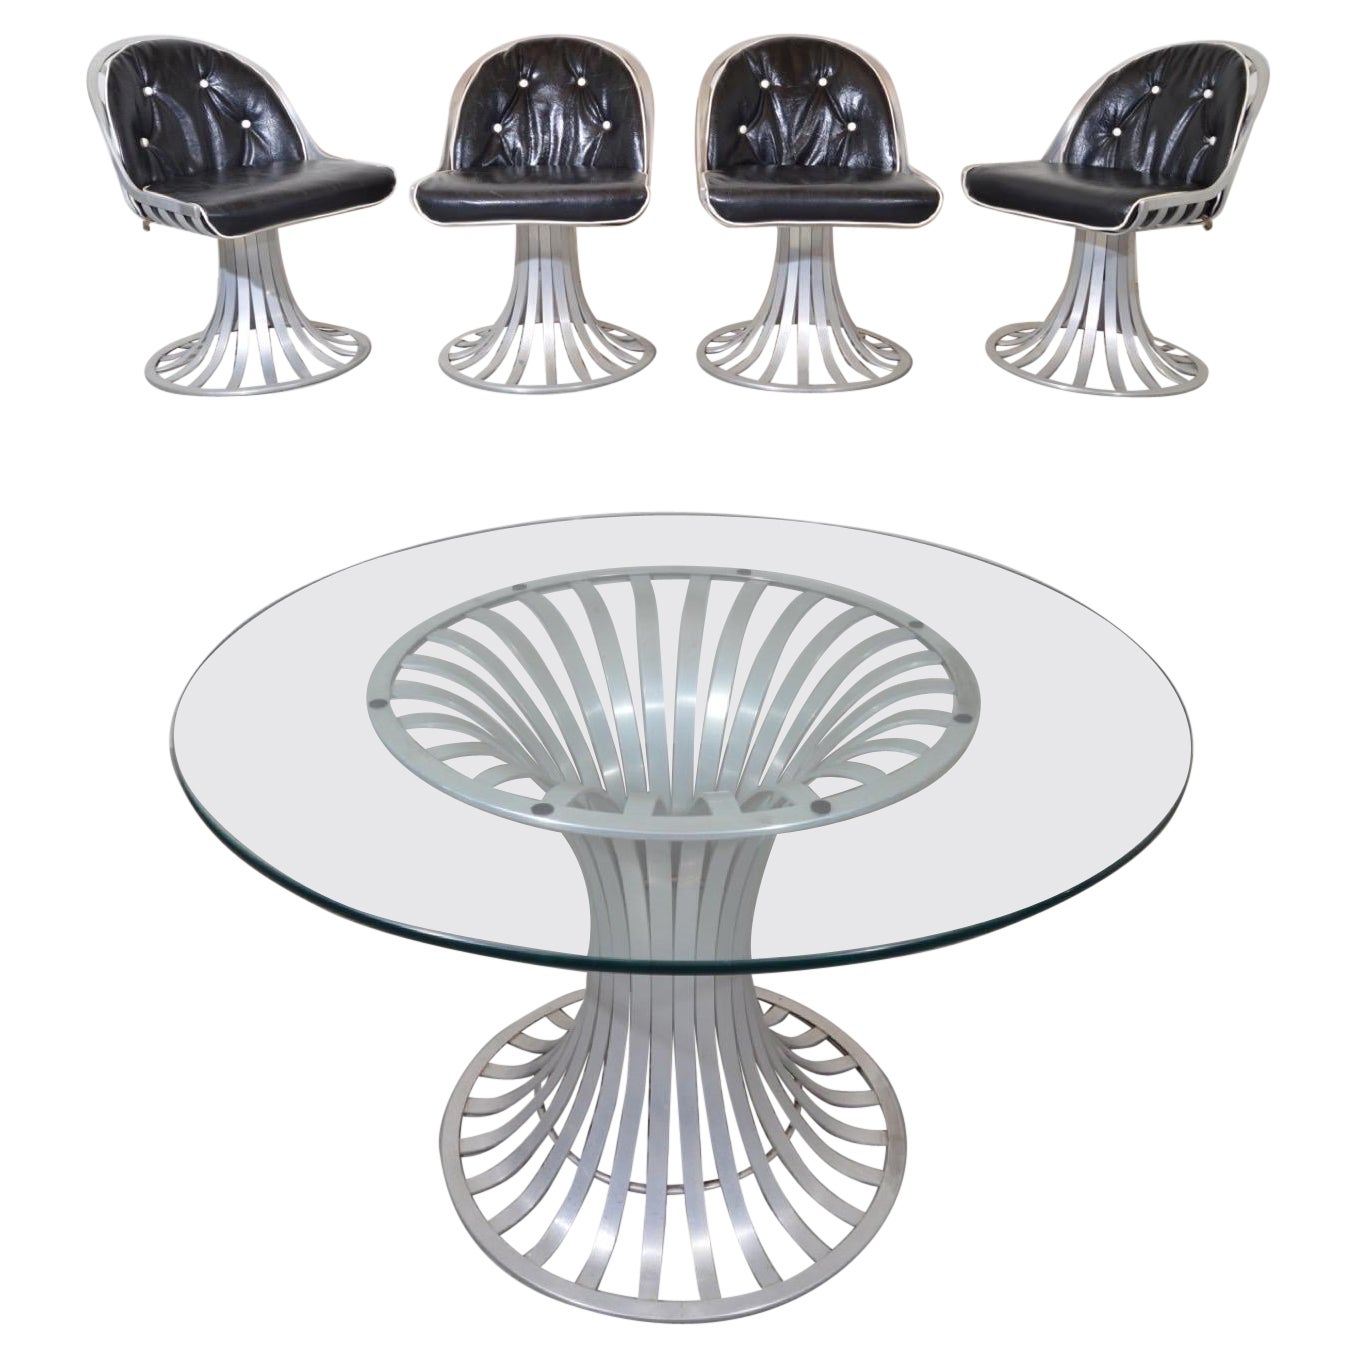 Russell Woodard Sculptural Aluminum Table and Chairs Dining Dinette Set